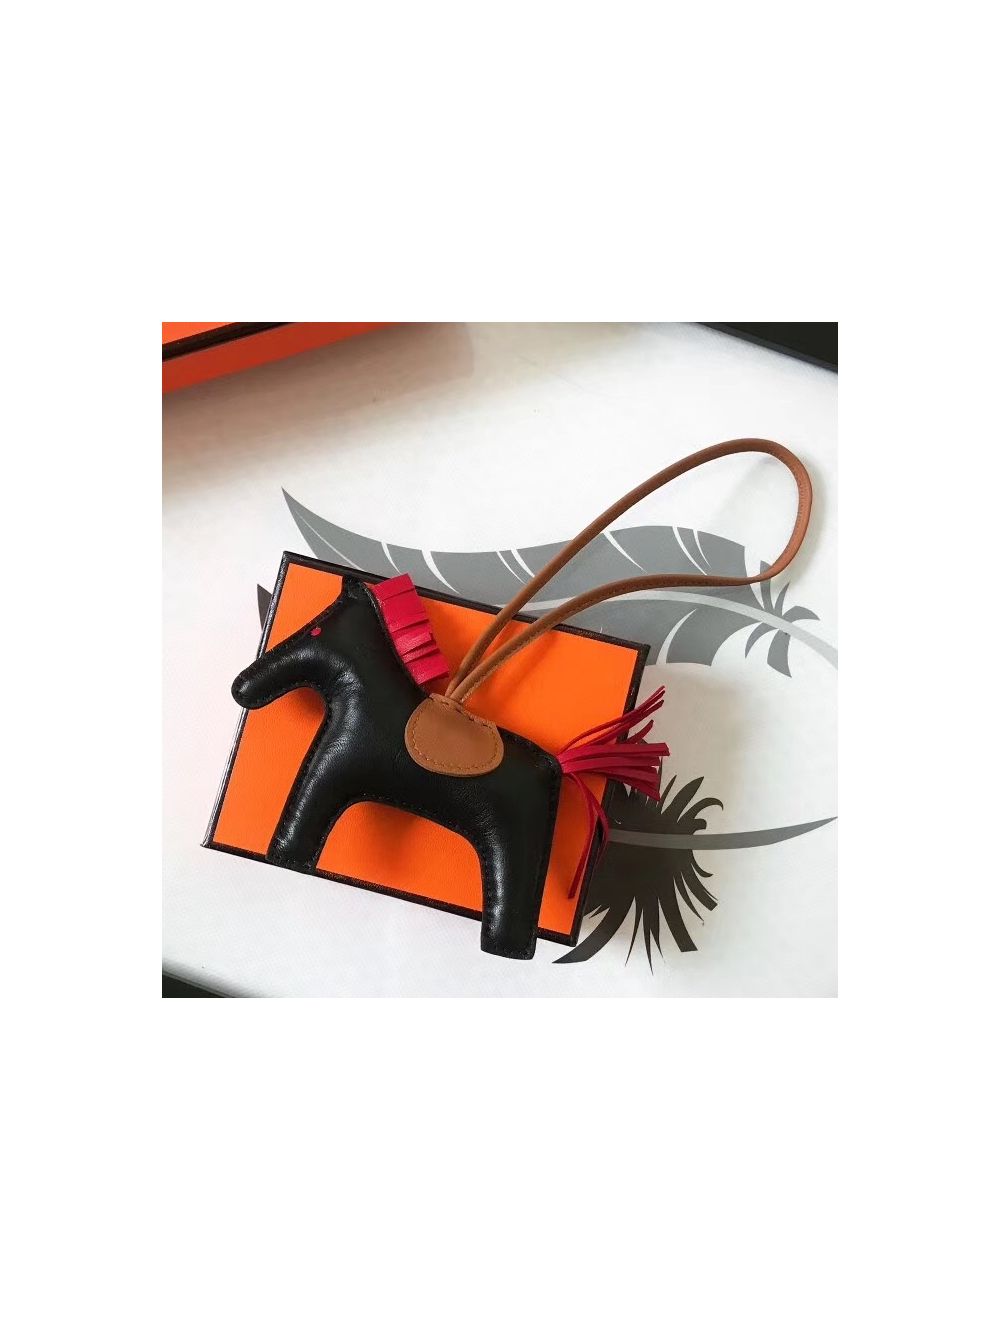 Hermes Rodeo Horse Leather Bag Charm Accessory